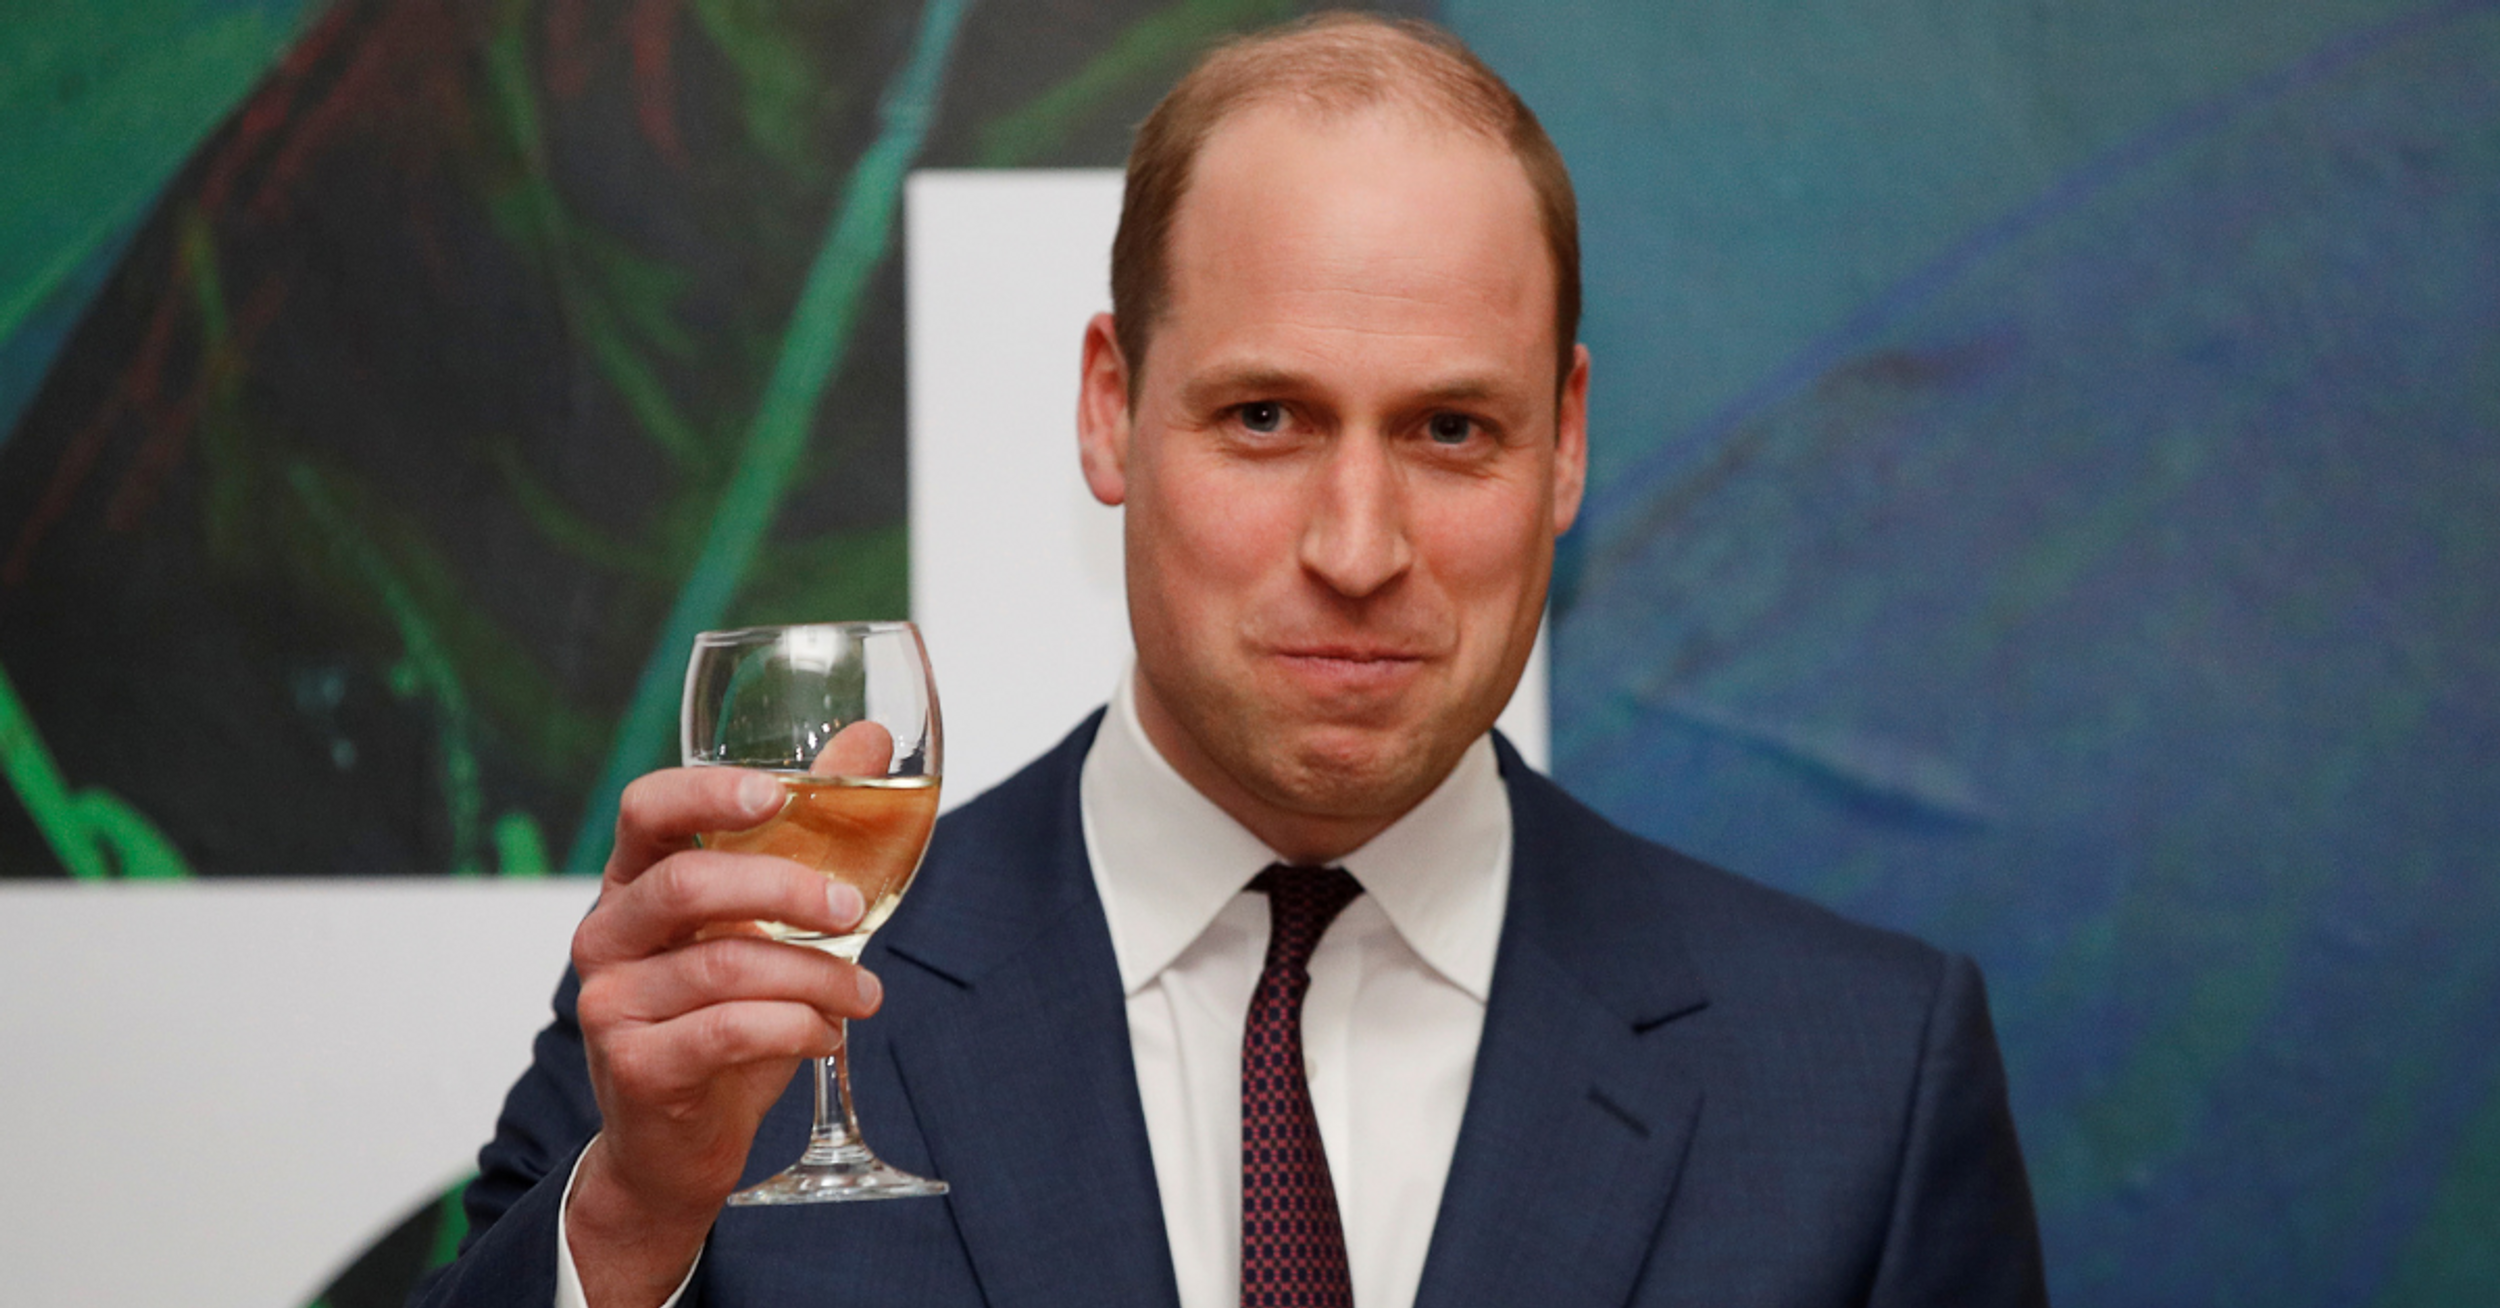 Prince William Just Got His First Dose—But All People Can See Are His Impressive 'Royal Guns'